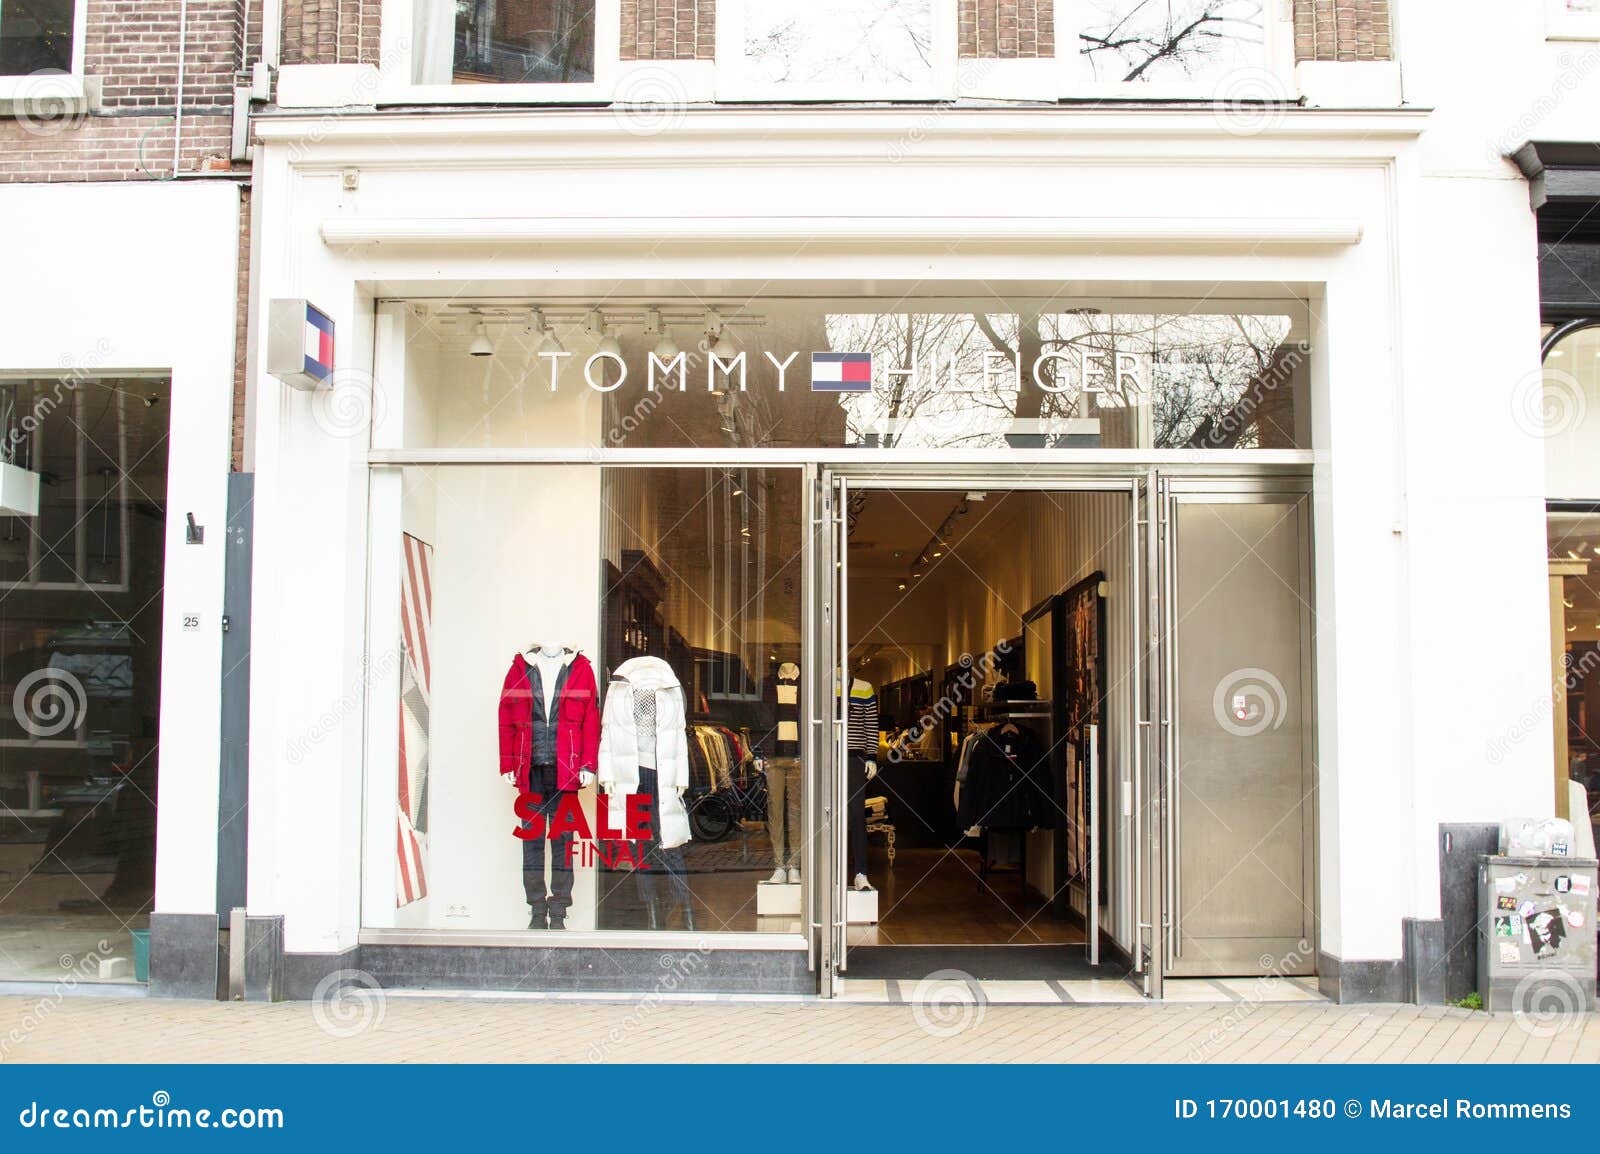 Entrance of a Tommy Hilfiger Store in Groningen Editorial Image - Image ...